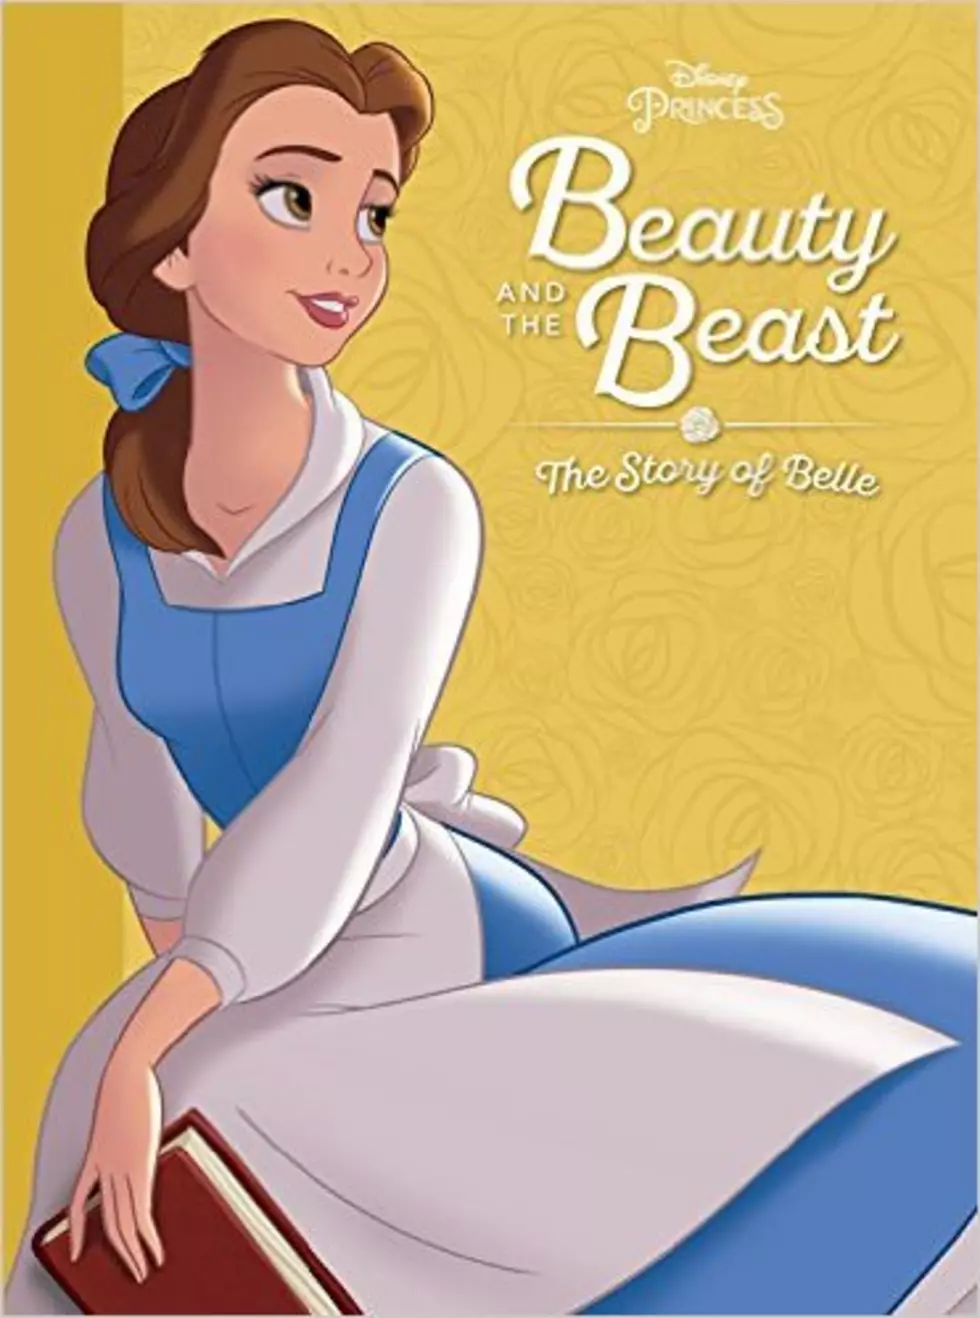 Belle to Visit Barnes & Noble to Celebrate ‘Beauty and the Beast’